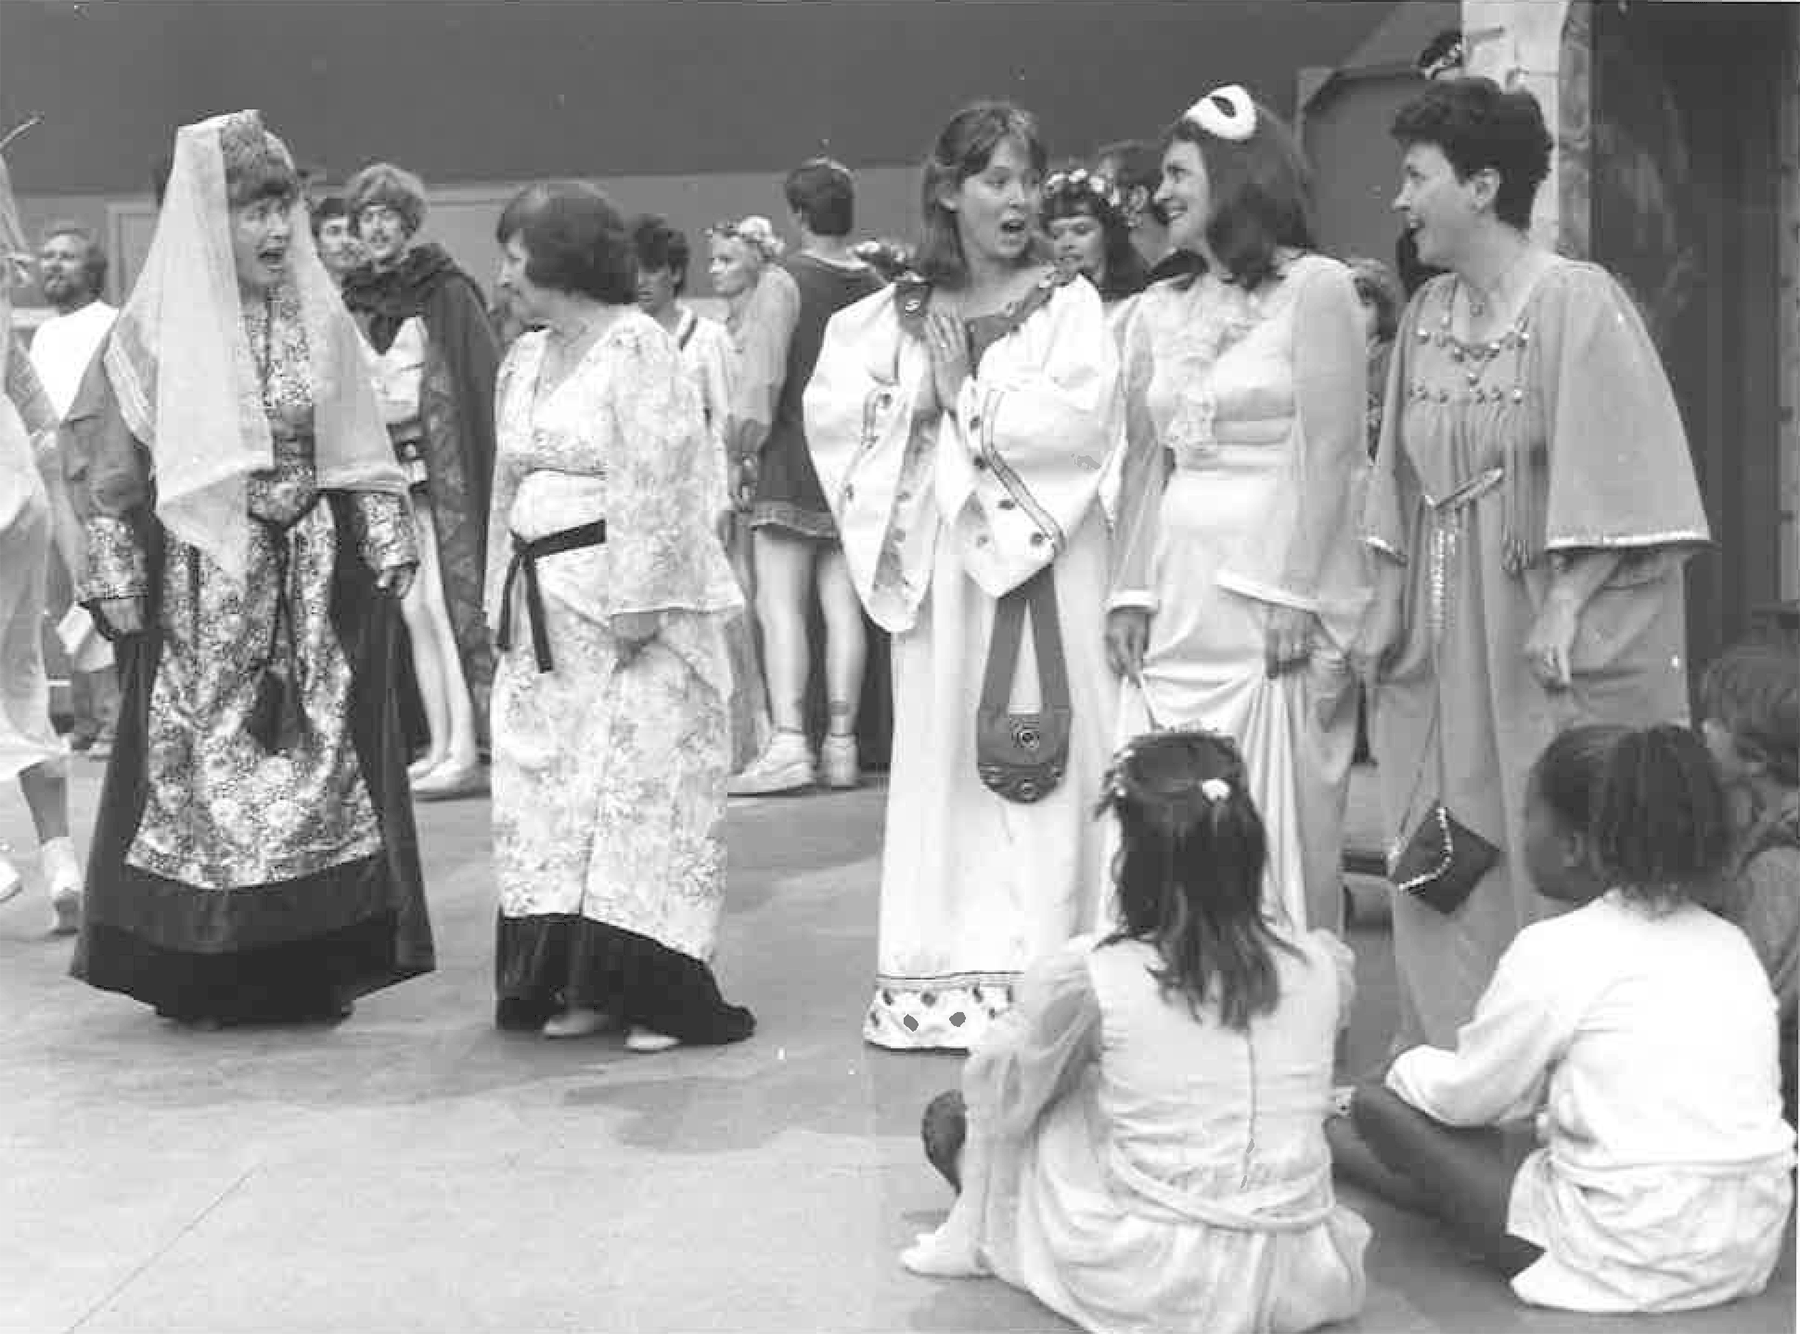 Ladies of Camelot production, 1986